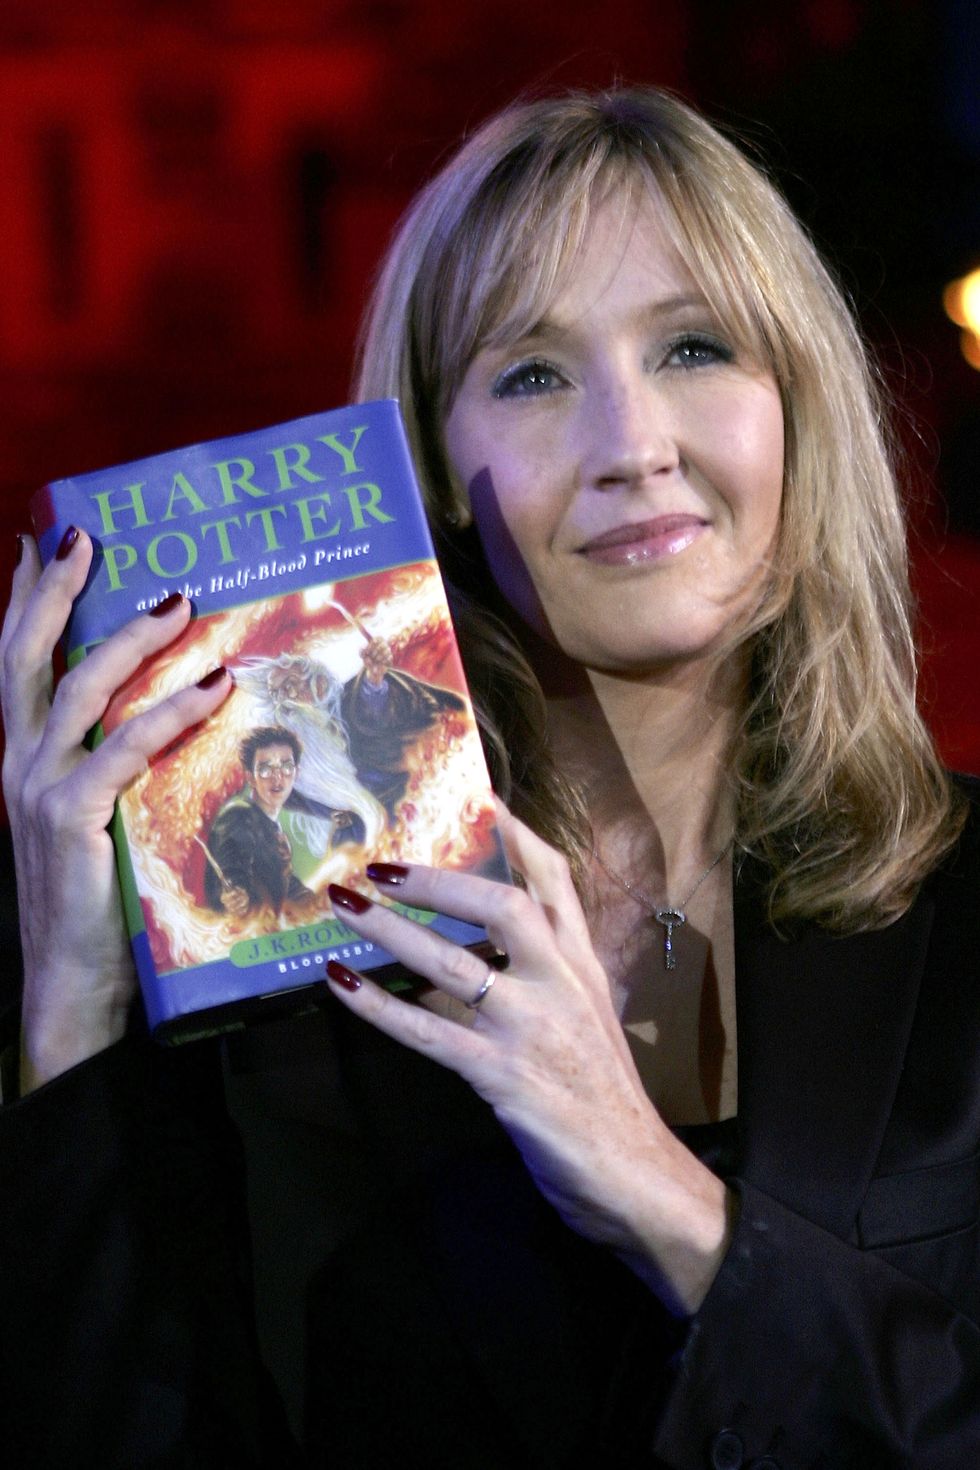 J K Rowling Reads From New Harry Potter Book